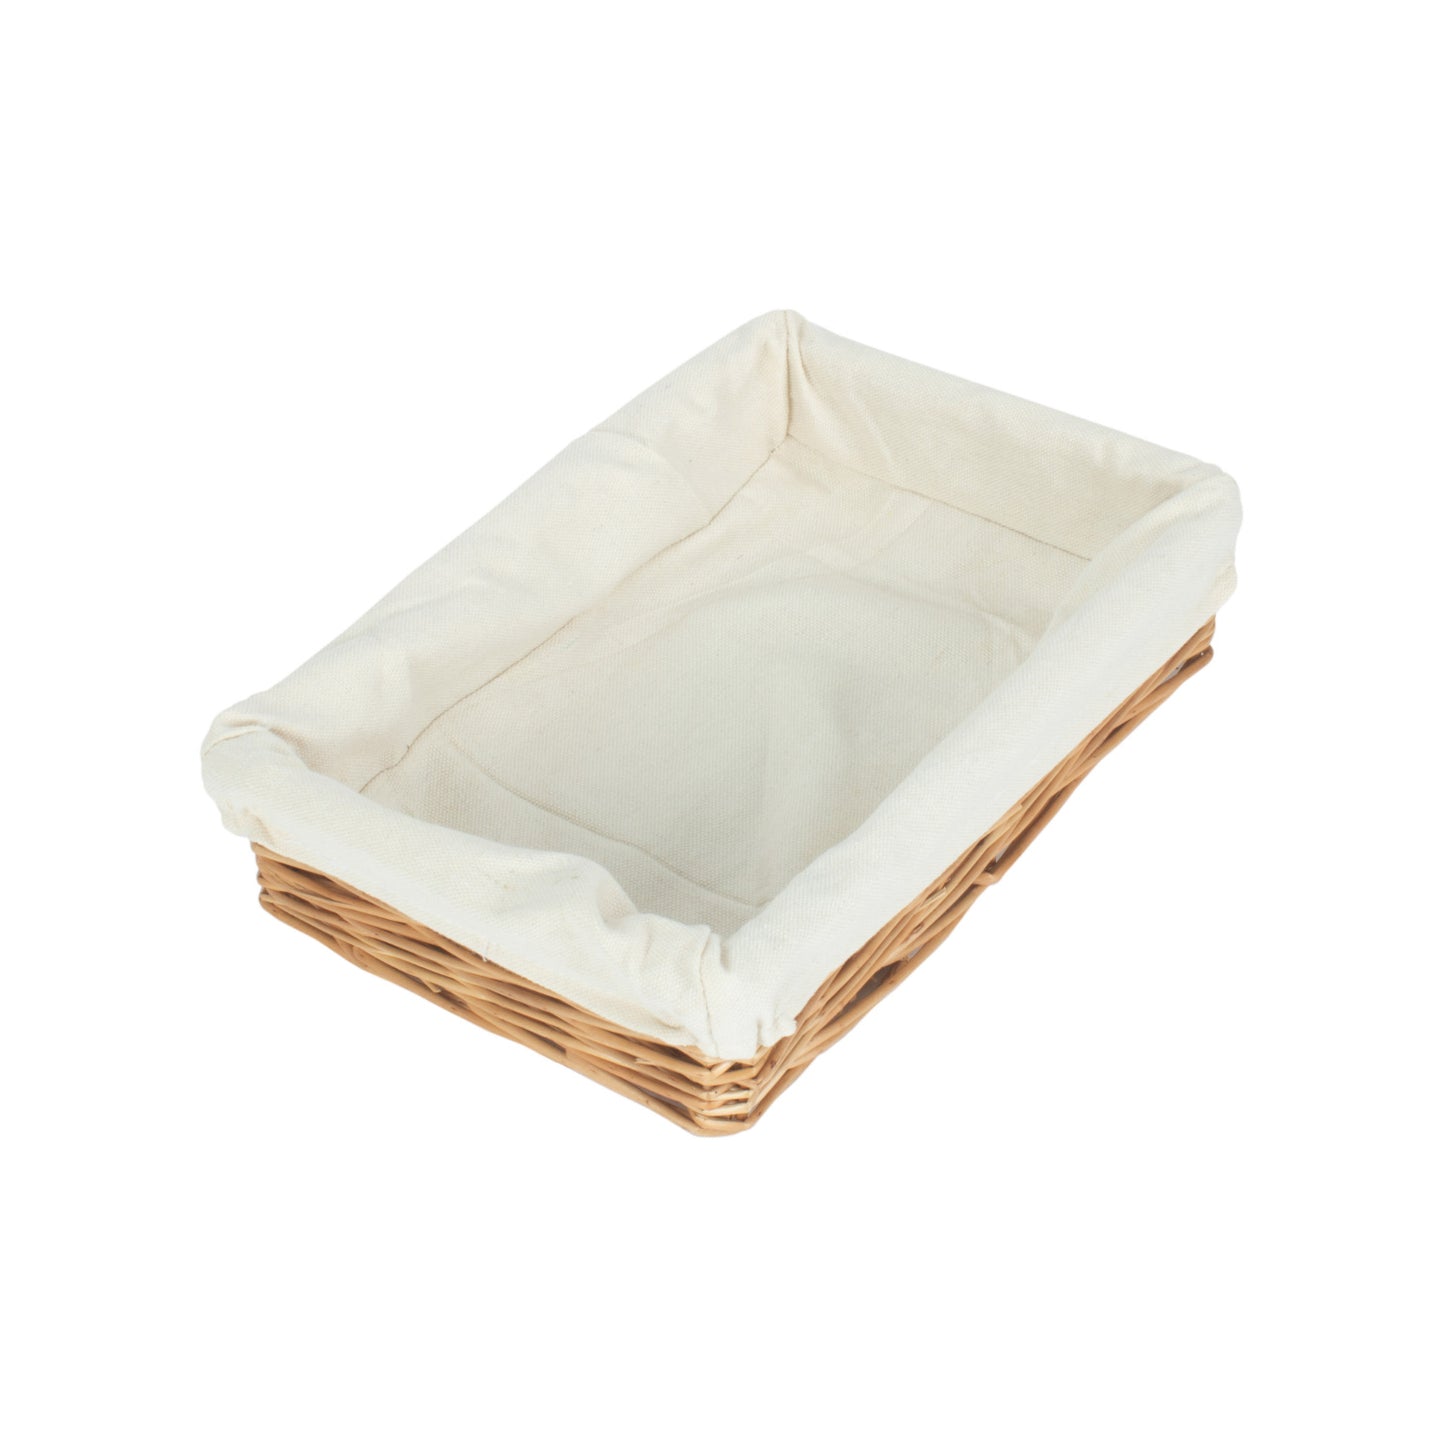 Small Lined Straight-sided Tray